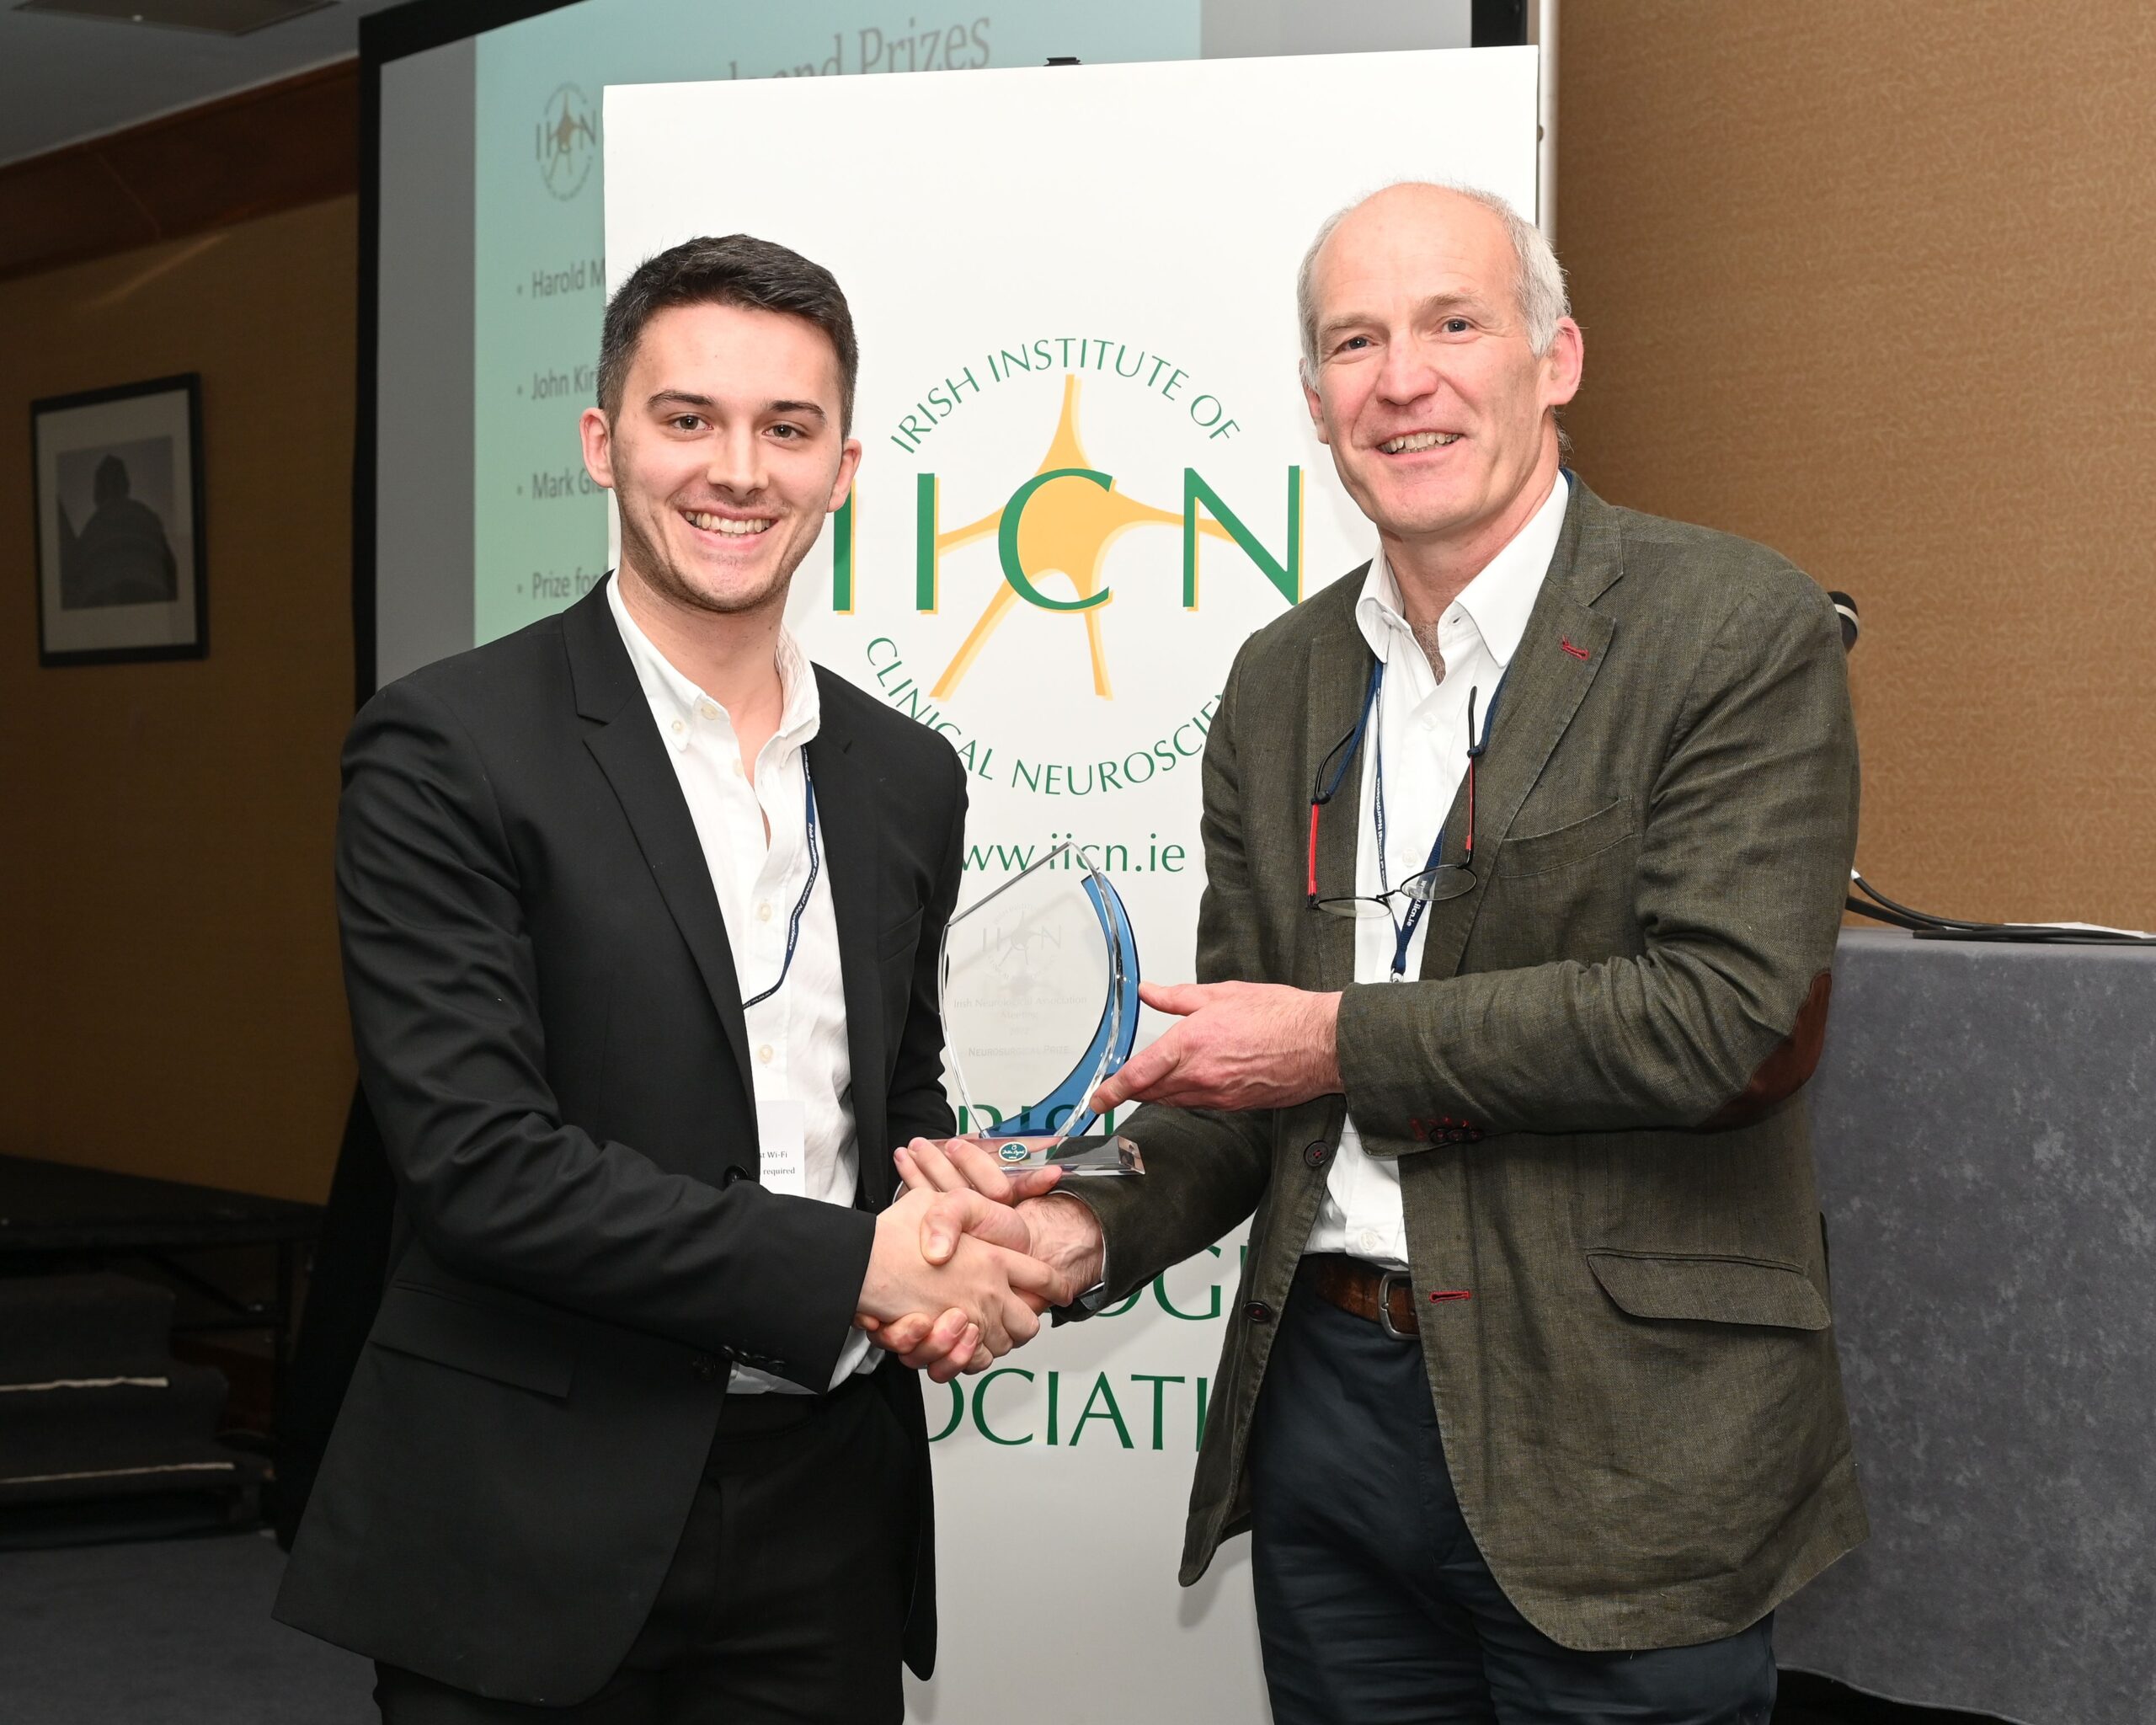 The Prize for the best Neurosurgical presentation was awarded to Mr. Steven Browne